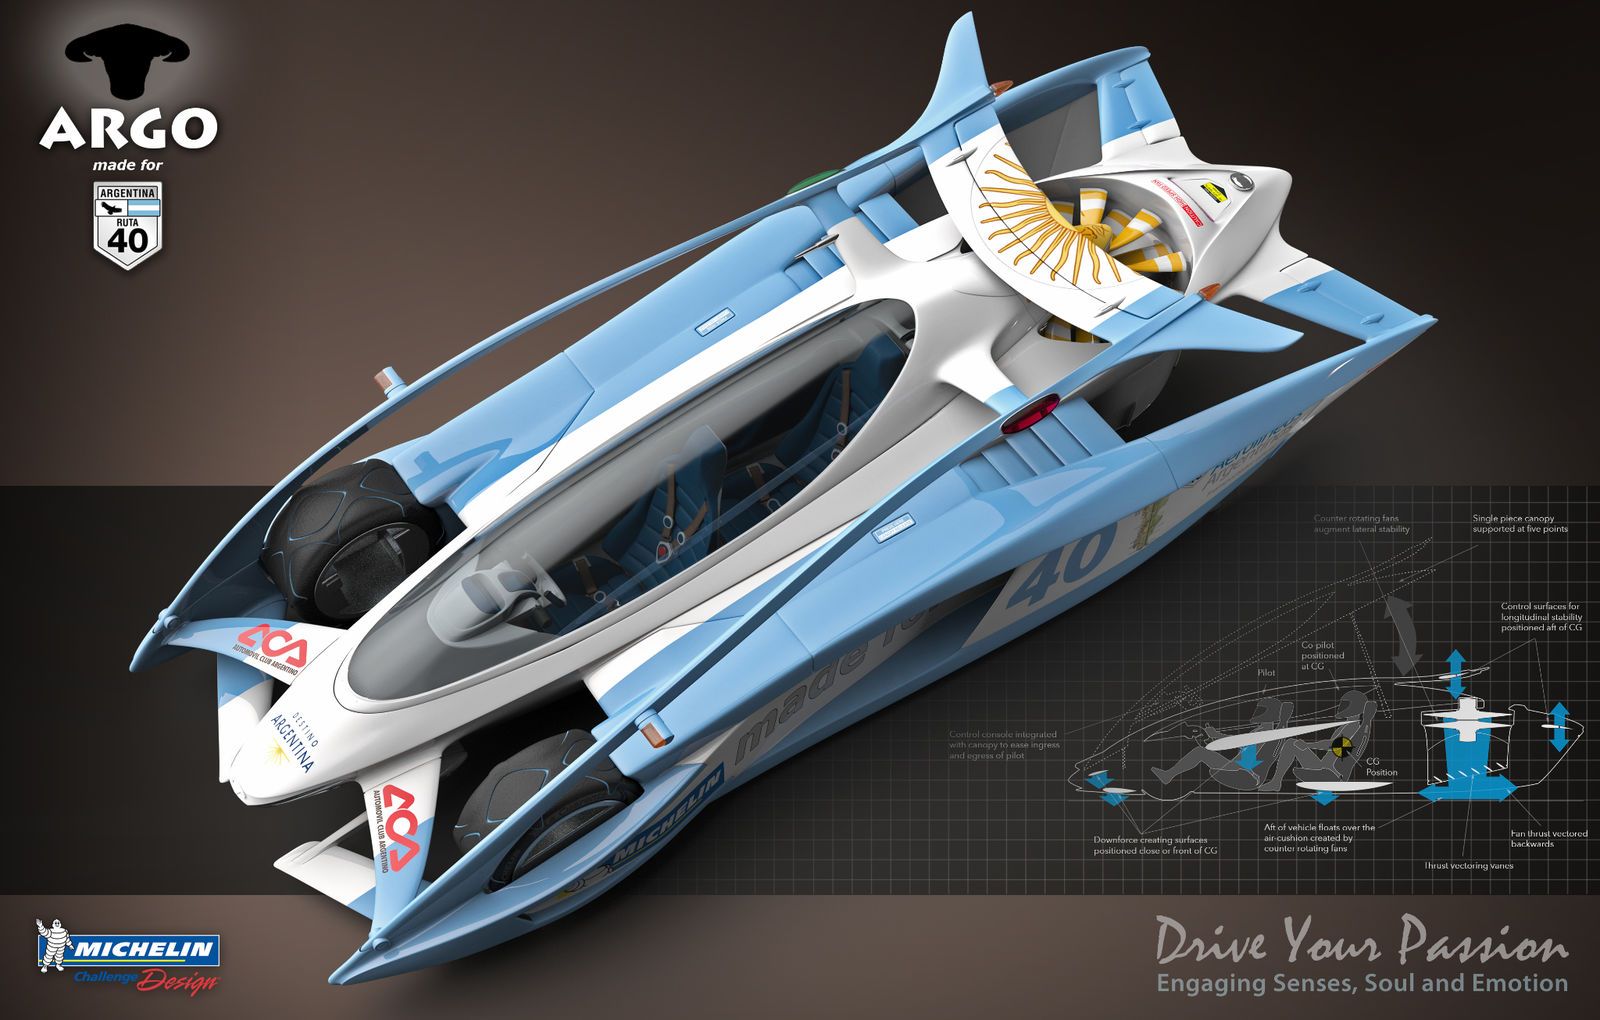 Amazing futuristic car designs from racing cars to rescue vehicles image 12